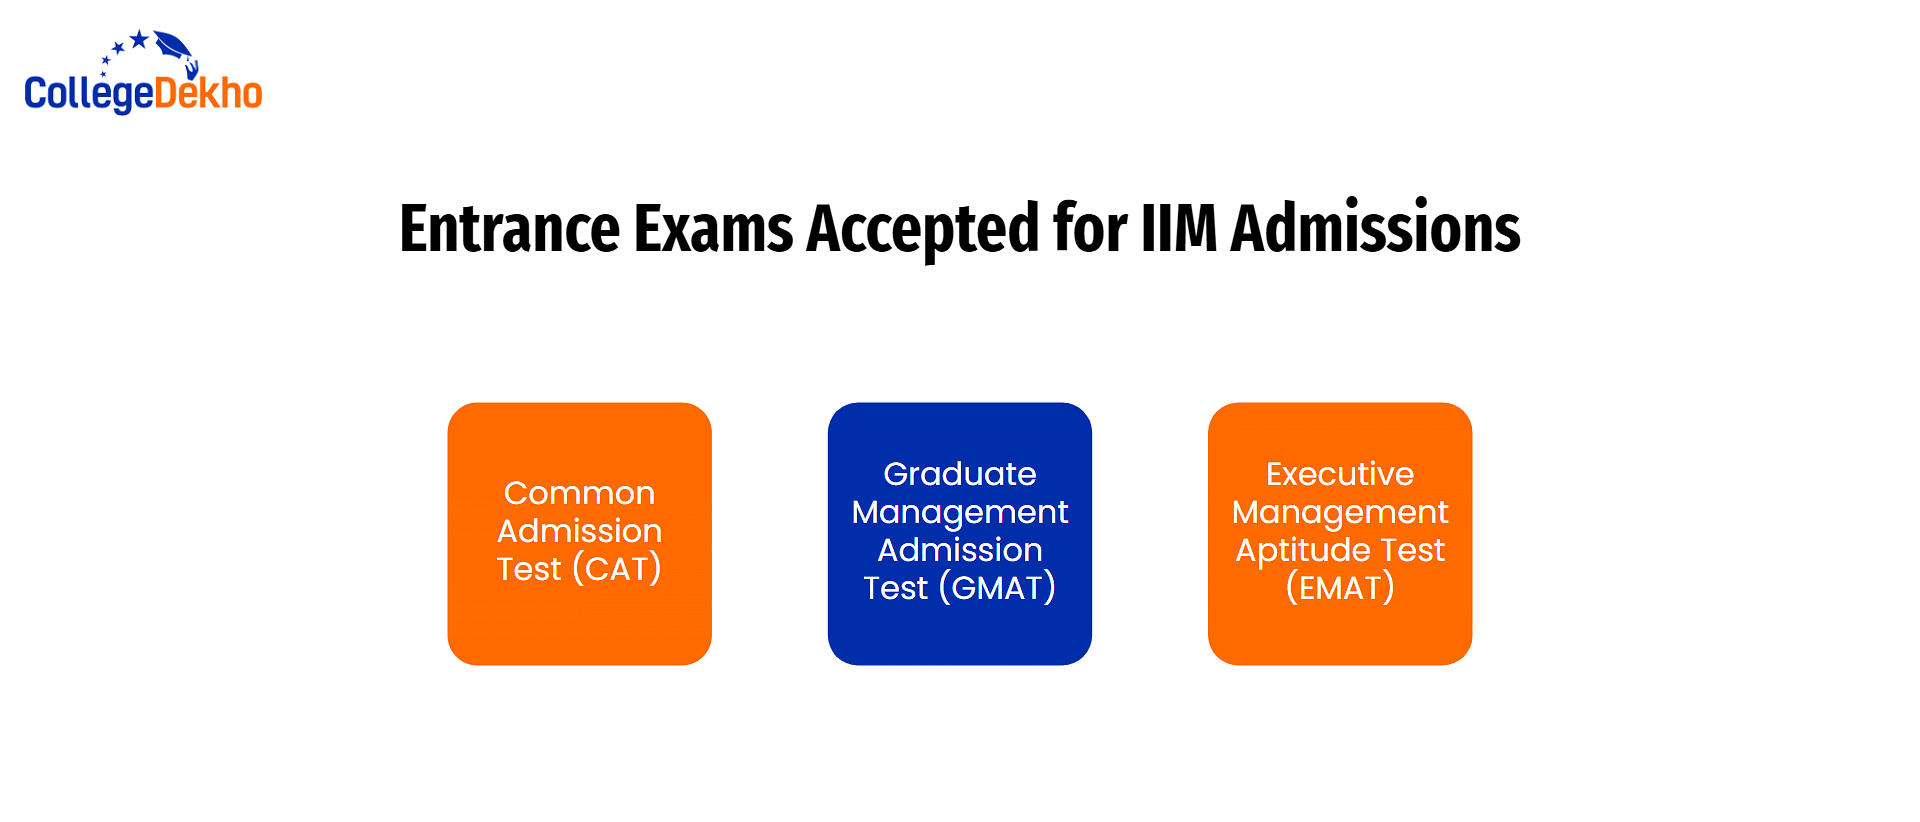 Entrance Exams Accepted for IIM Admissions